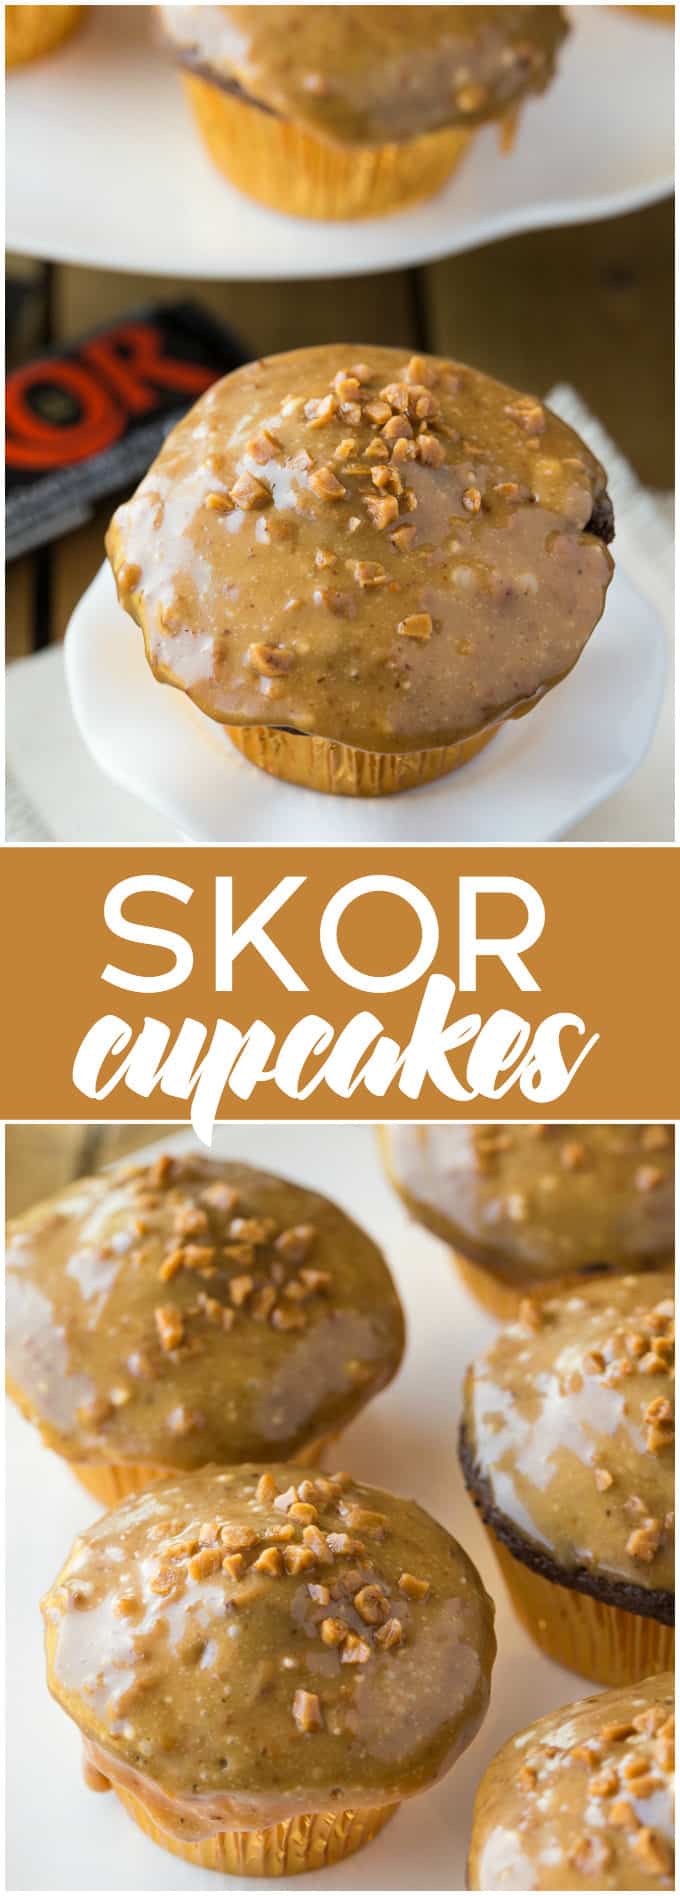 Skor Cupcakes - These cupcakes are an easy way to dress up a boxed cake mix. The addition of Skor bits makes them crunchy and buttery, and the pairing with fluffy chocolate cake is irresistible. 